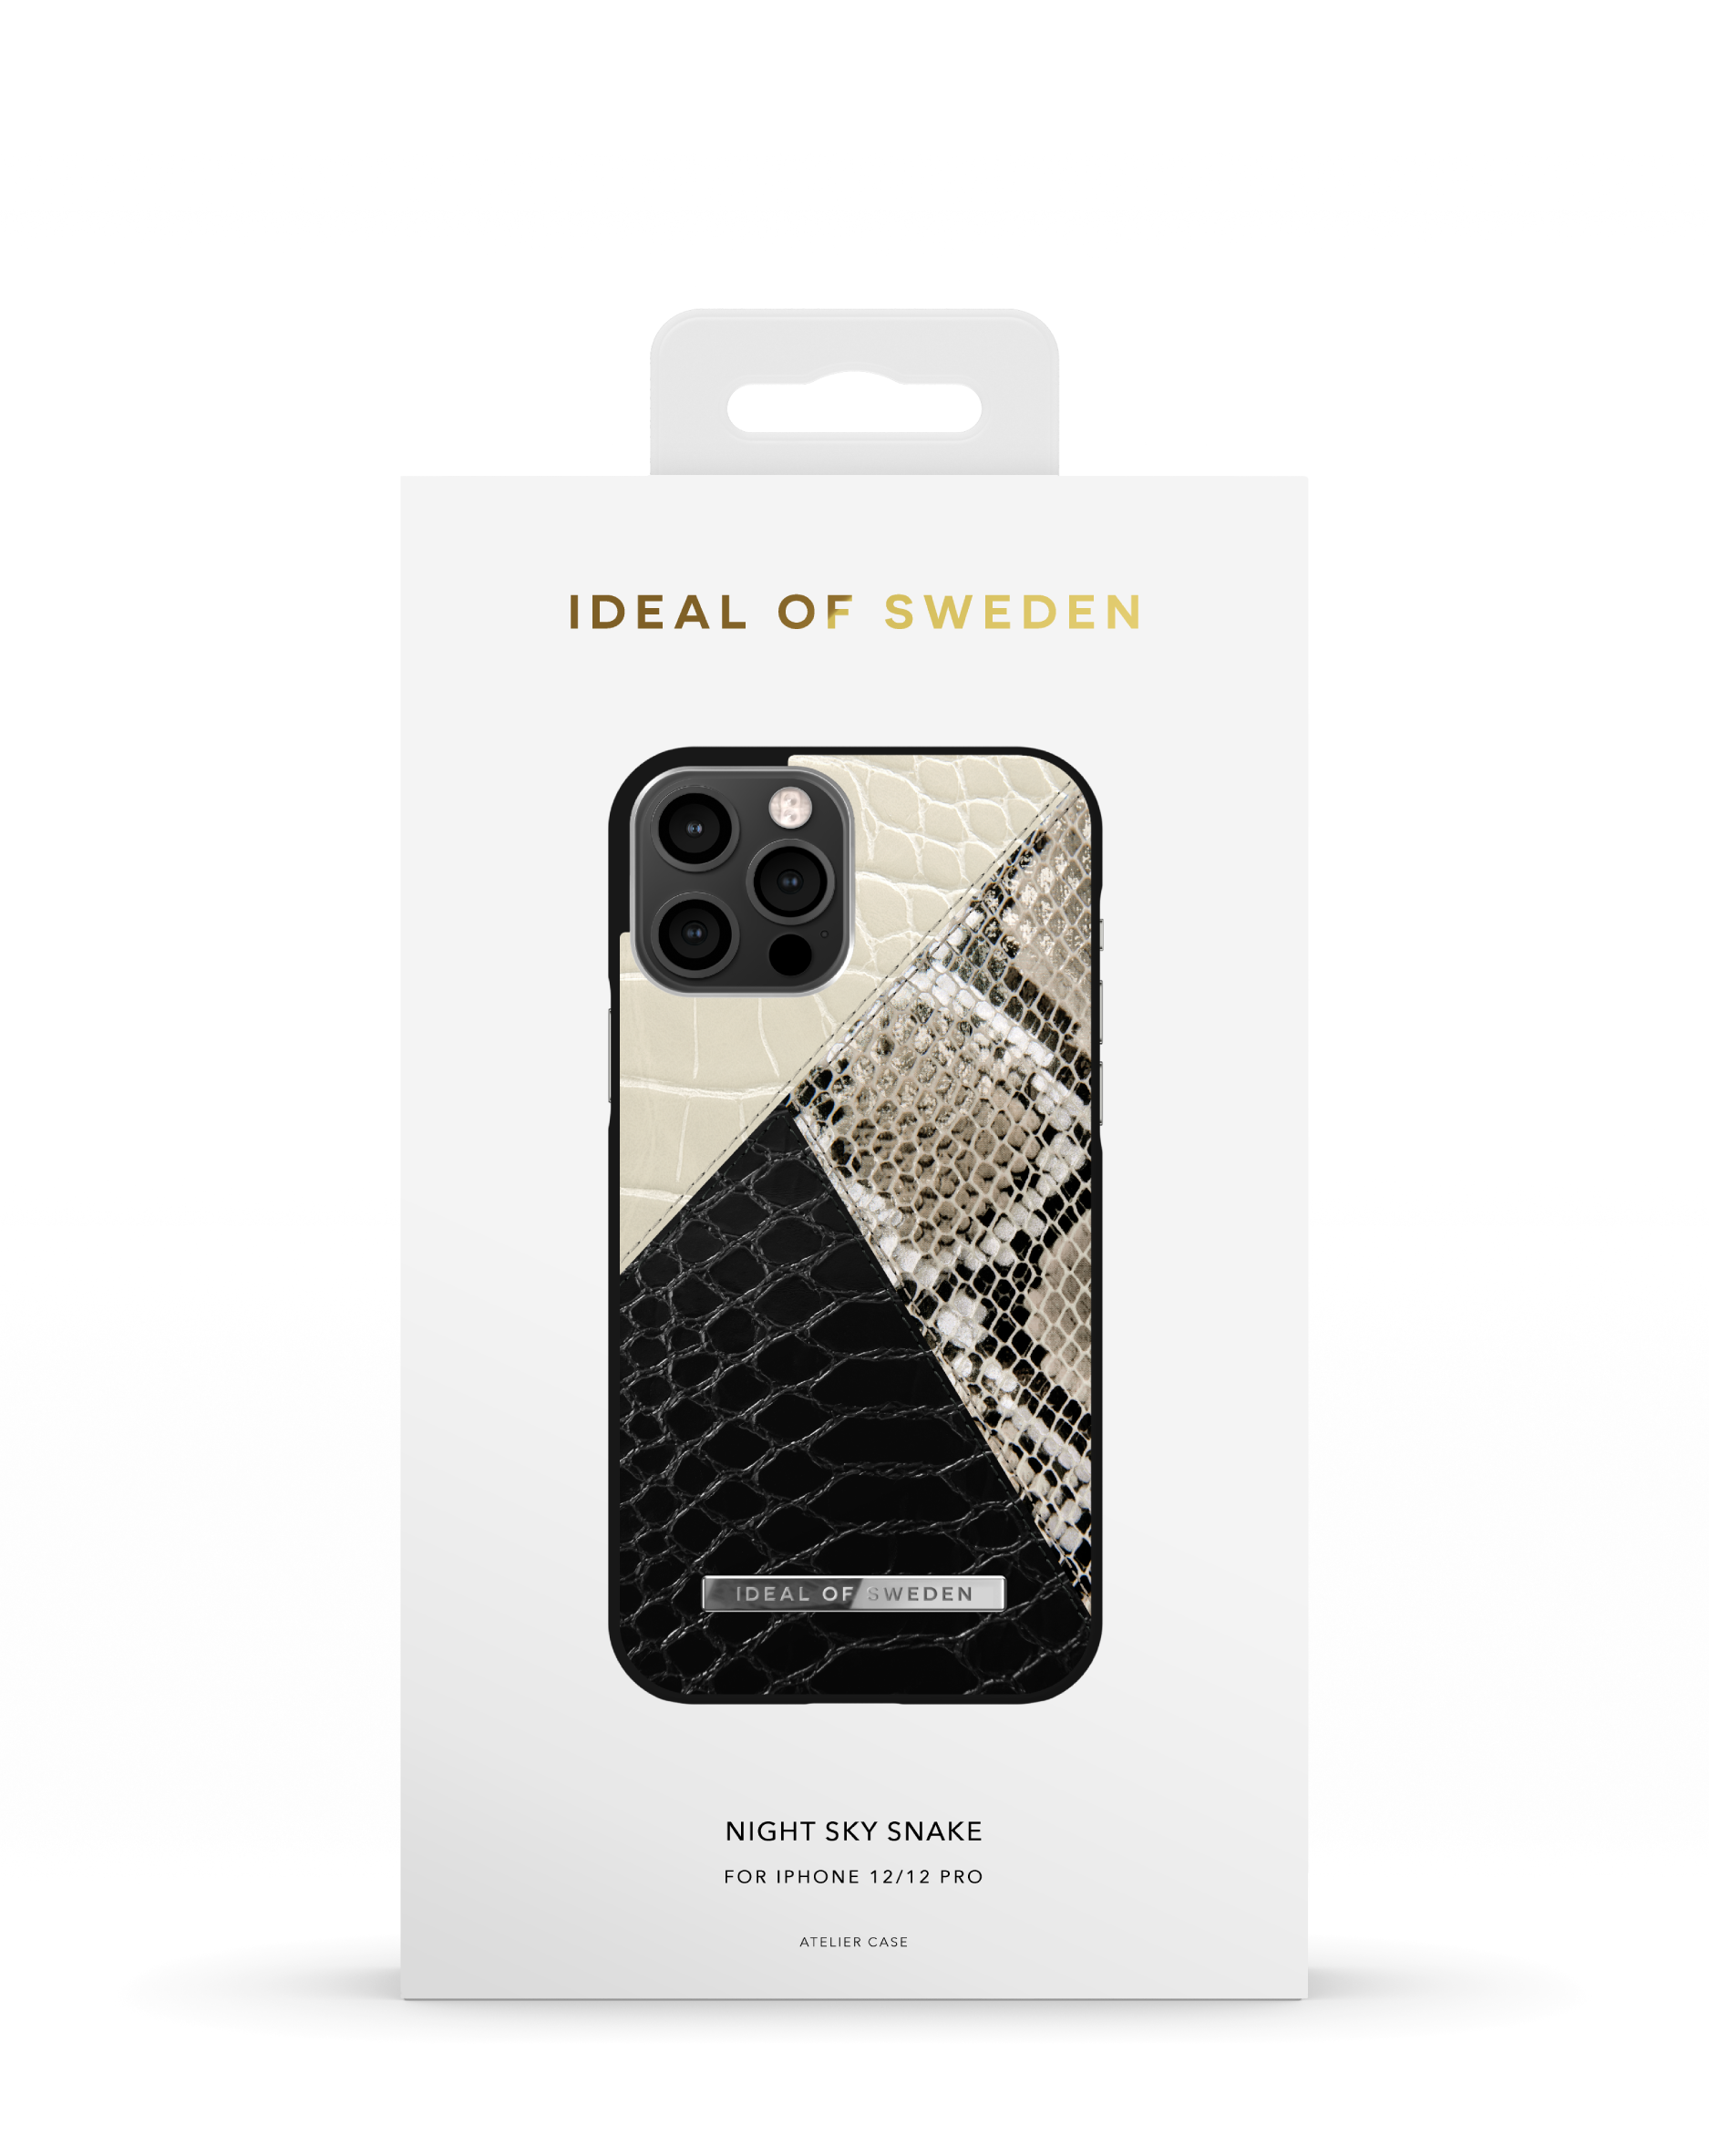 Snake Night Apple Backcover, IDACSS21-I2061-271, Apple, 12 12, Sky OF SWEDEN iPhone iPhone Apple IDEAL Pro,